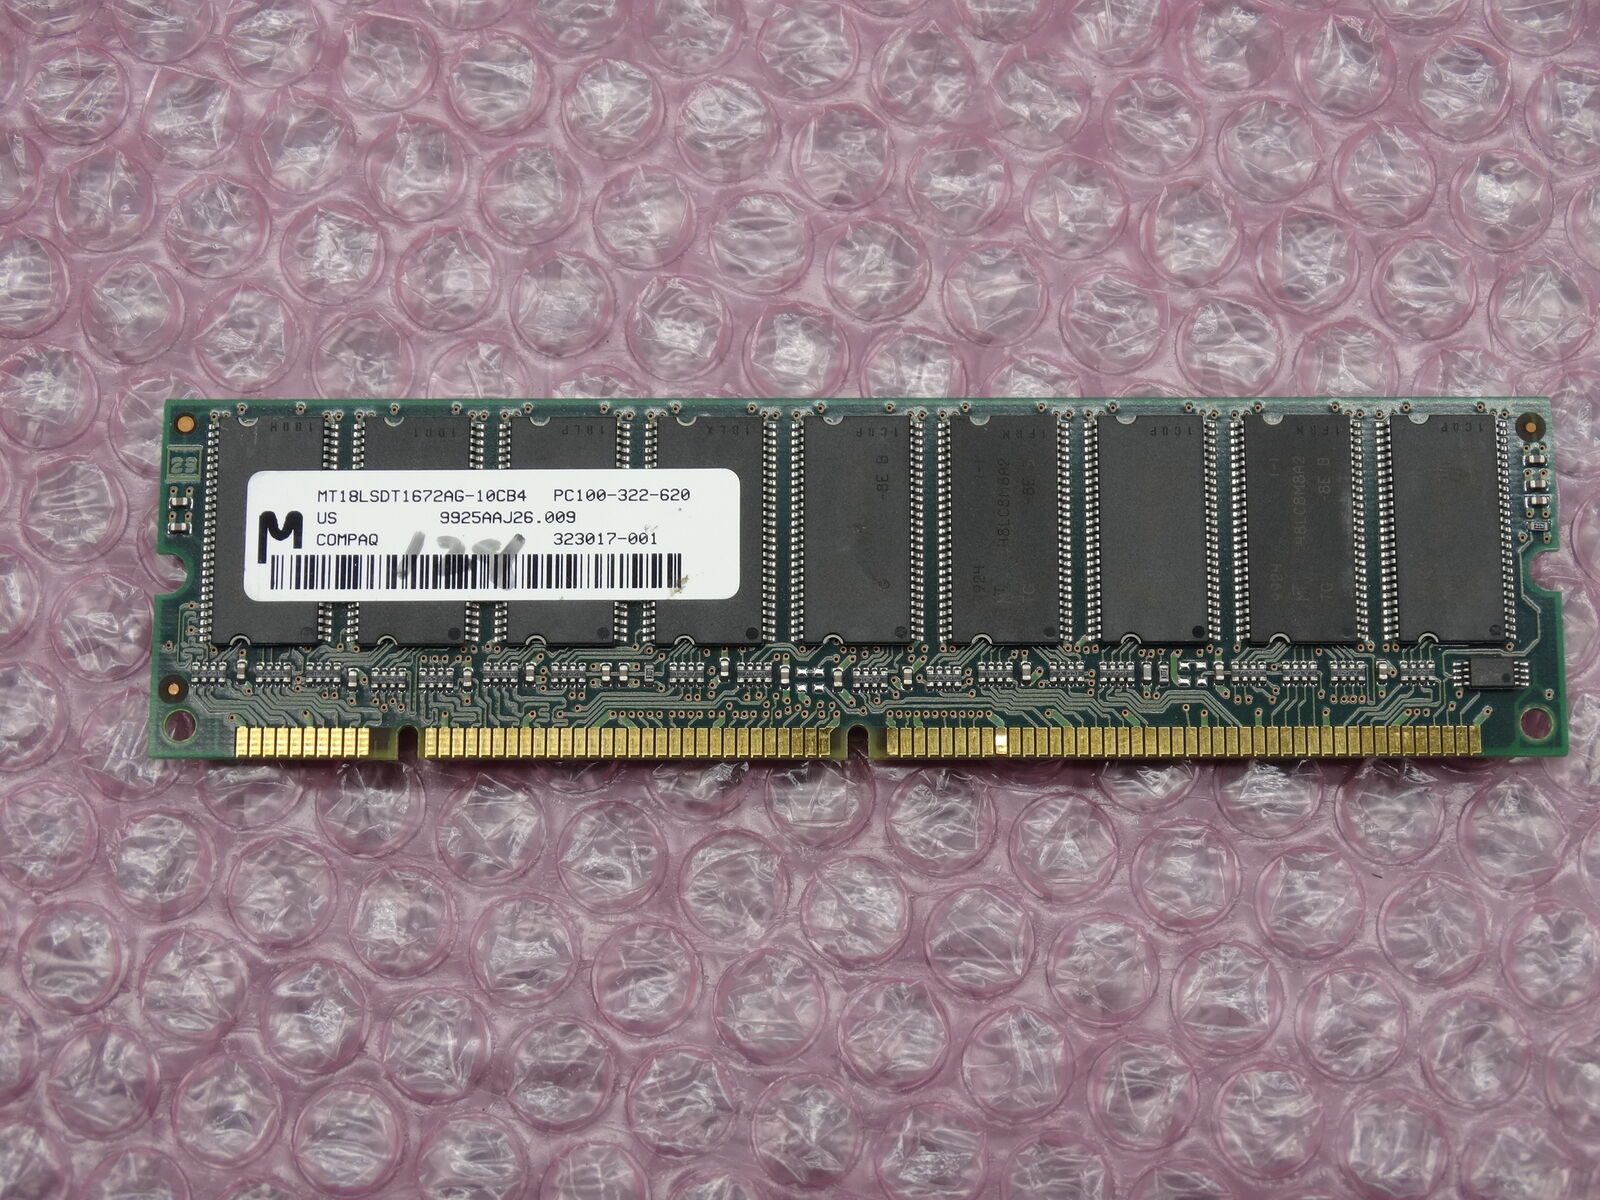 Micron 64MB Memory RAM PC100-322-620 Mainframe Collection